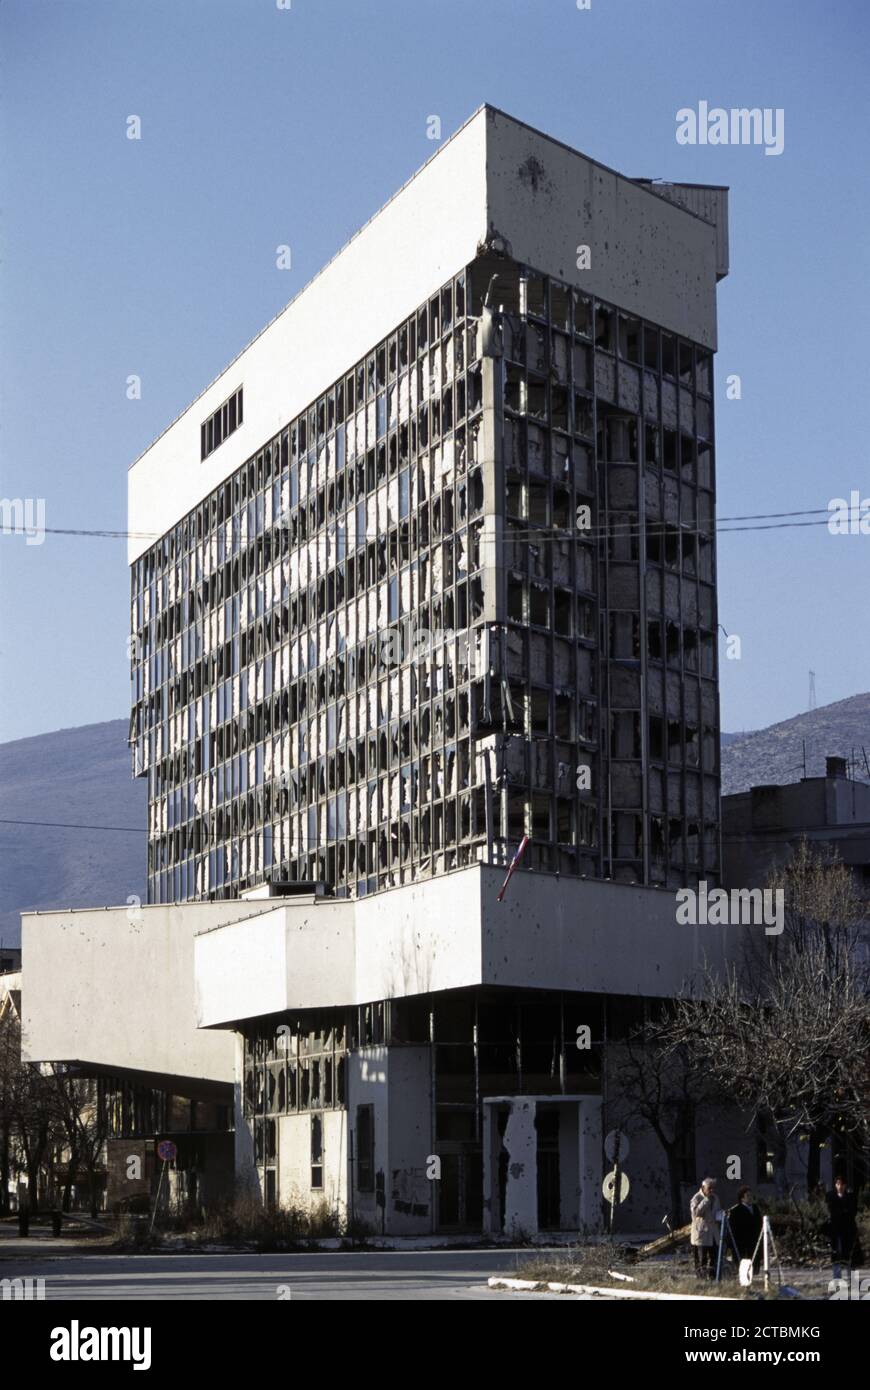 10th December 1995 During the war in Bosnia: the battle-scarred Staklena Banka building, formerly the Ljubljaska Banka, in Mostar. Stock Photo